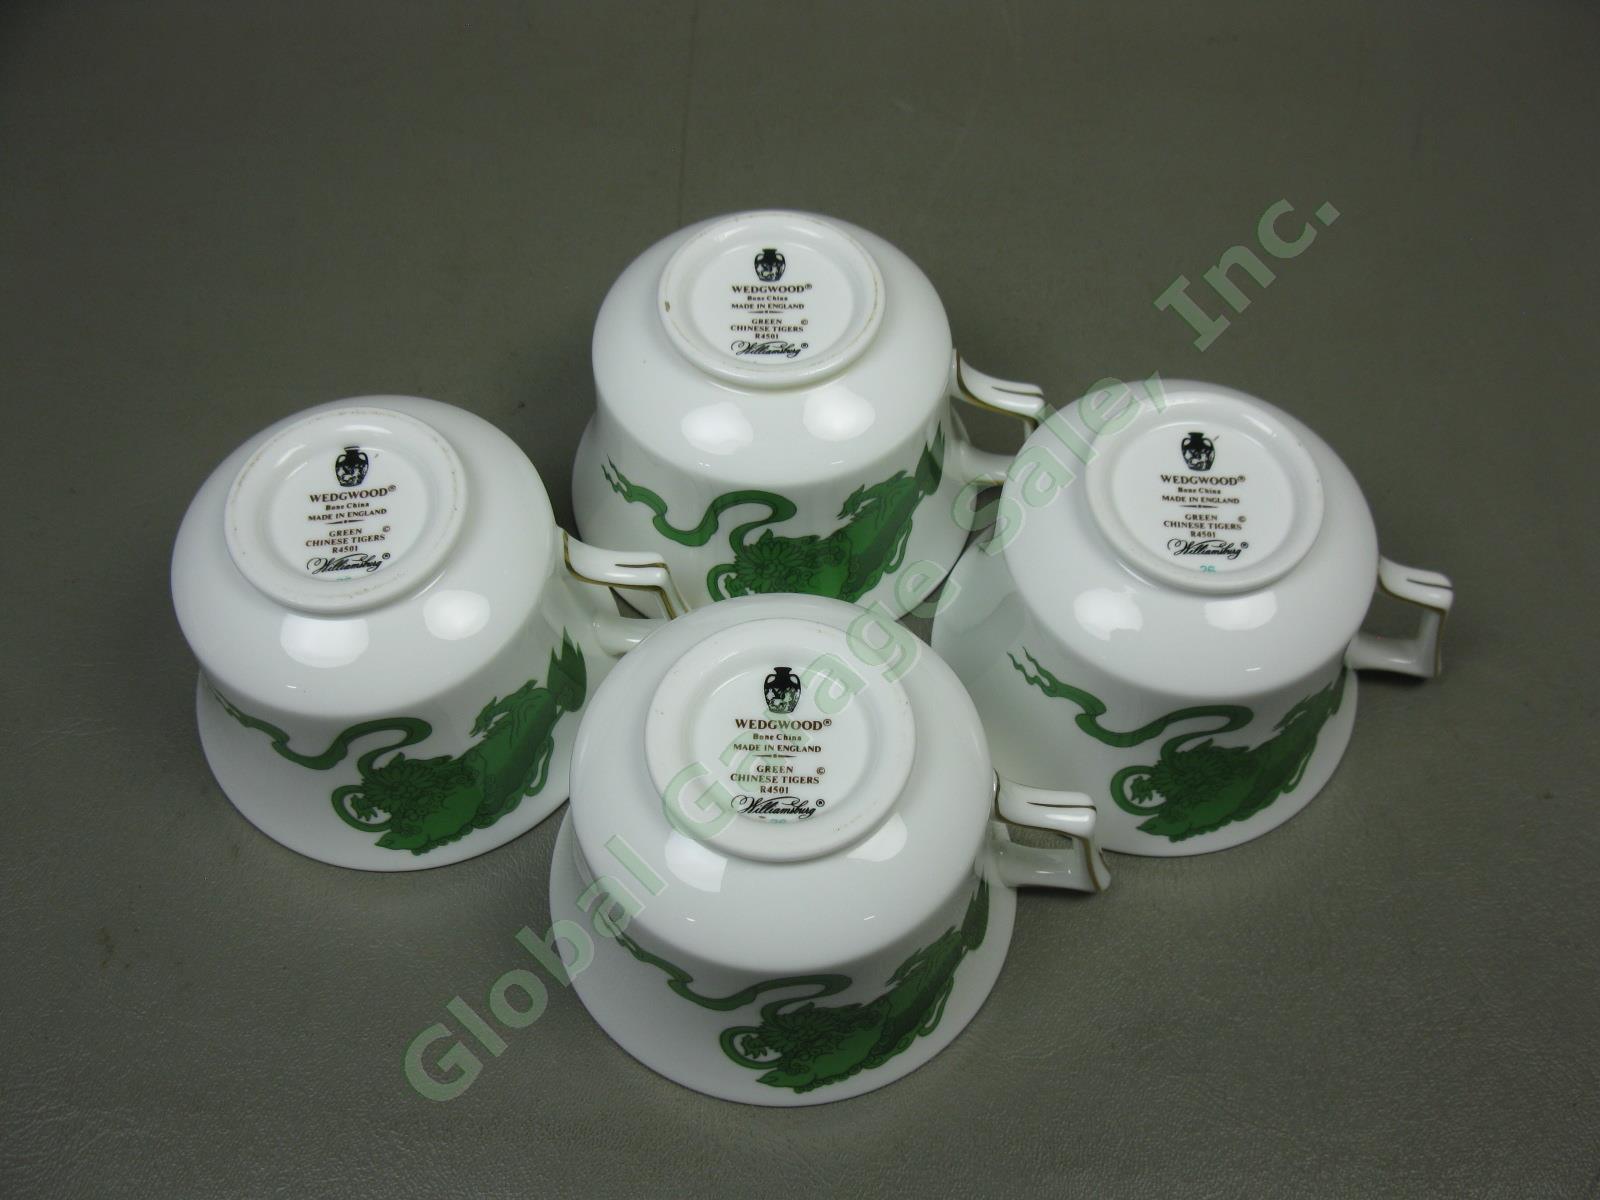 4 Wedgwood England Bone China Chinese Tigers Green Coffee Cups & Saucers Set Lot 5